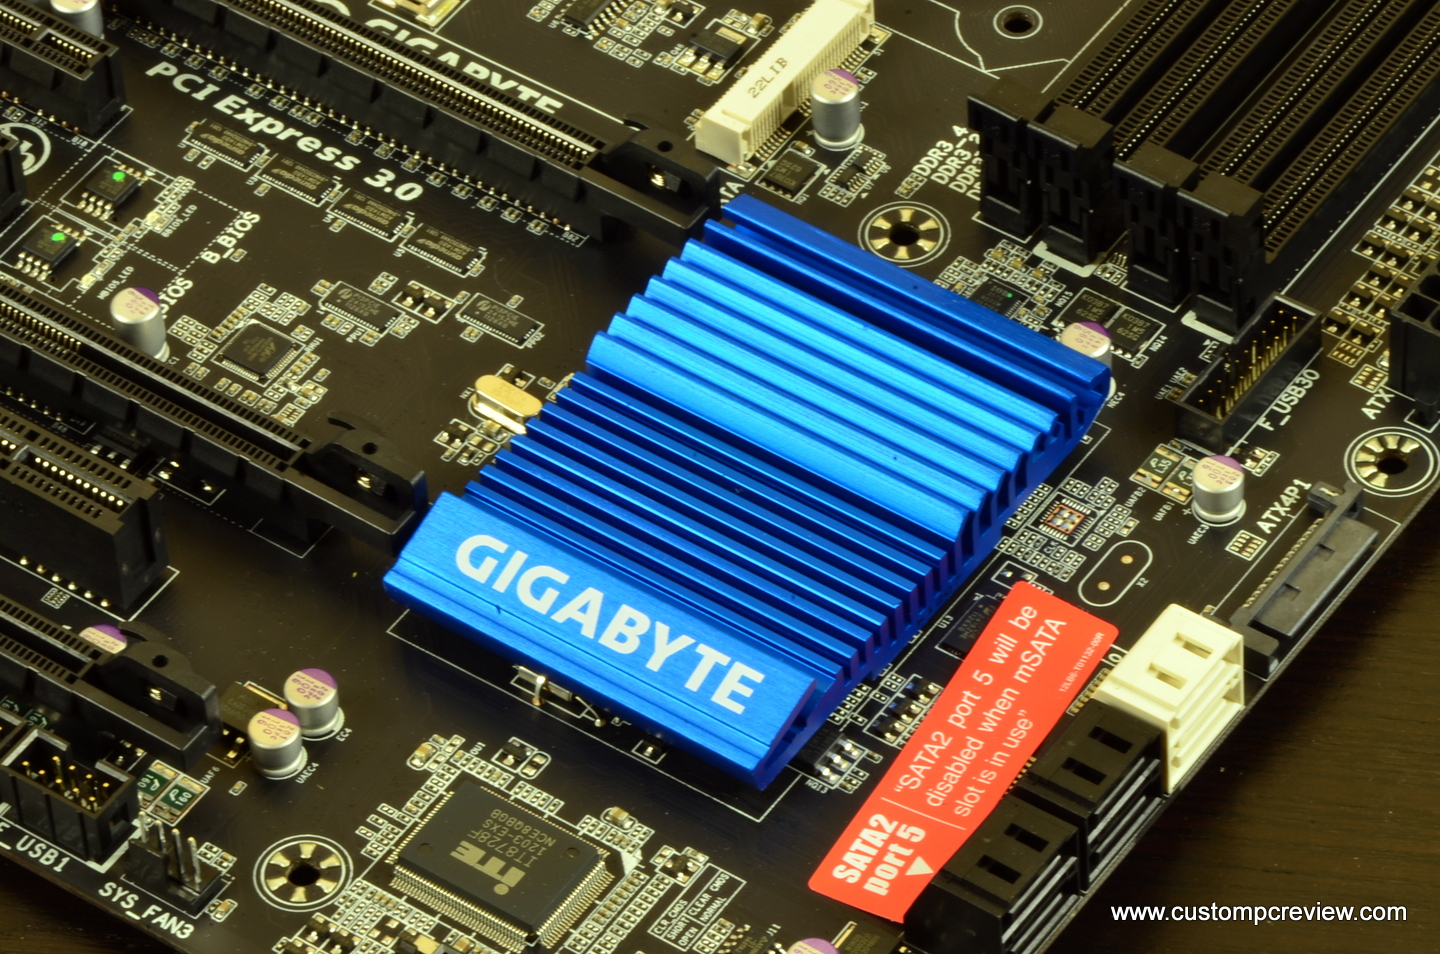 Gigabyte Z77X-UD3H Motherboard Review - Custom PC Review